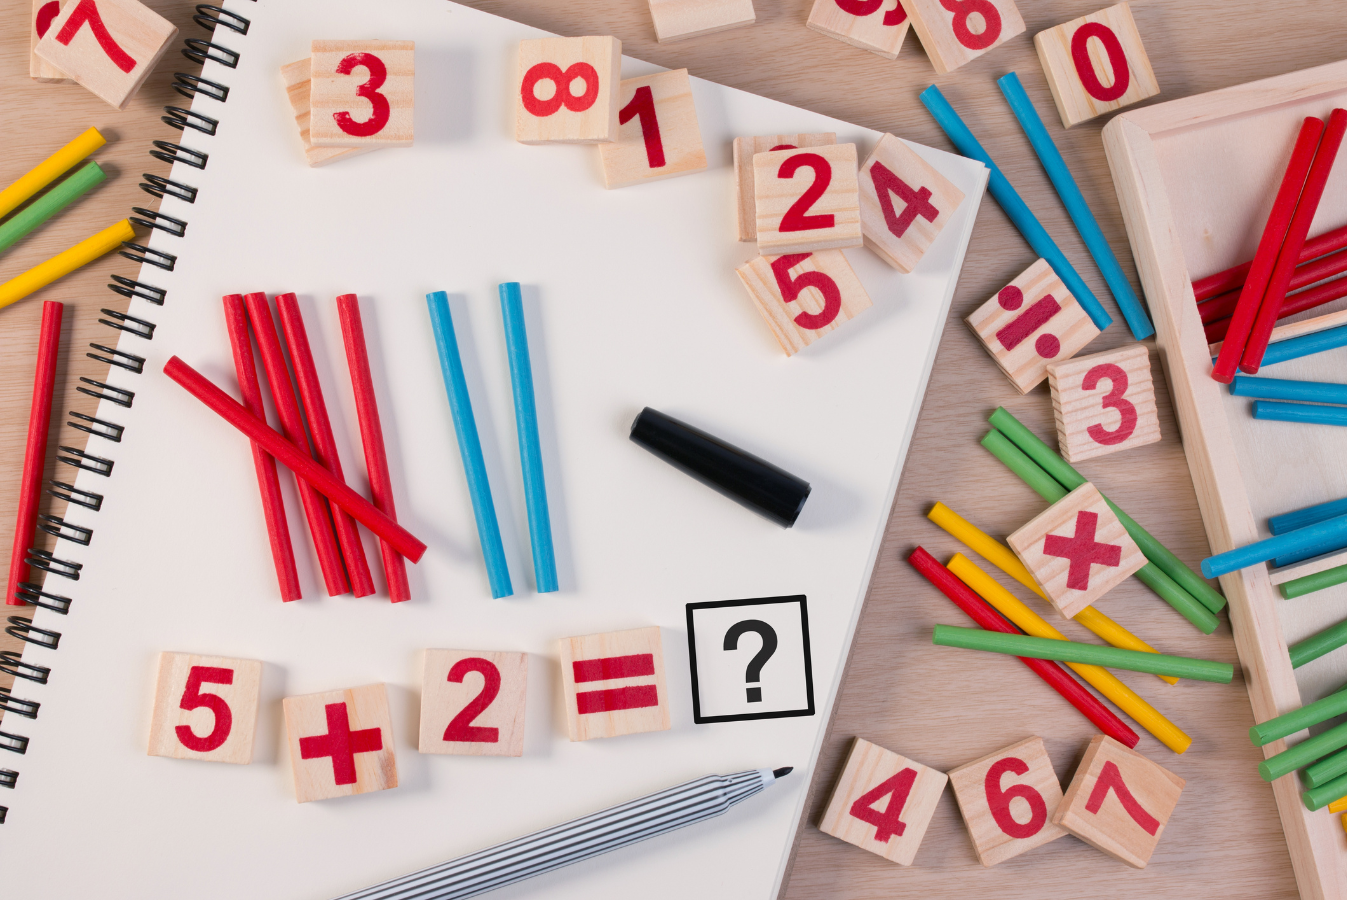 Everyday Maths: The Importance of Learning Maths From A Young Age